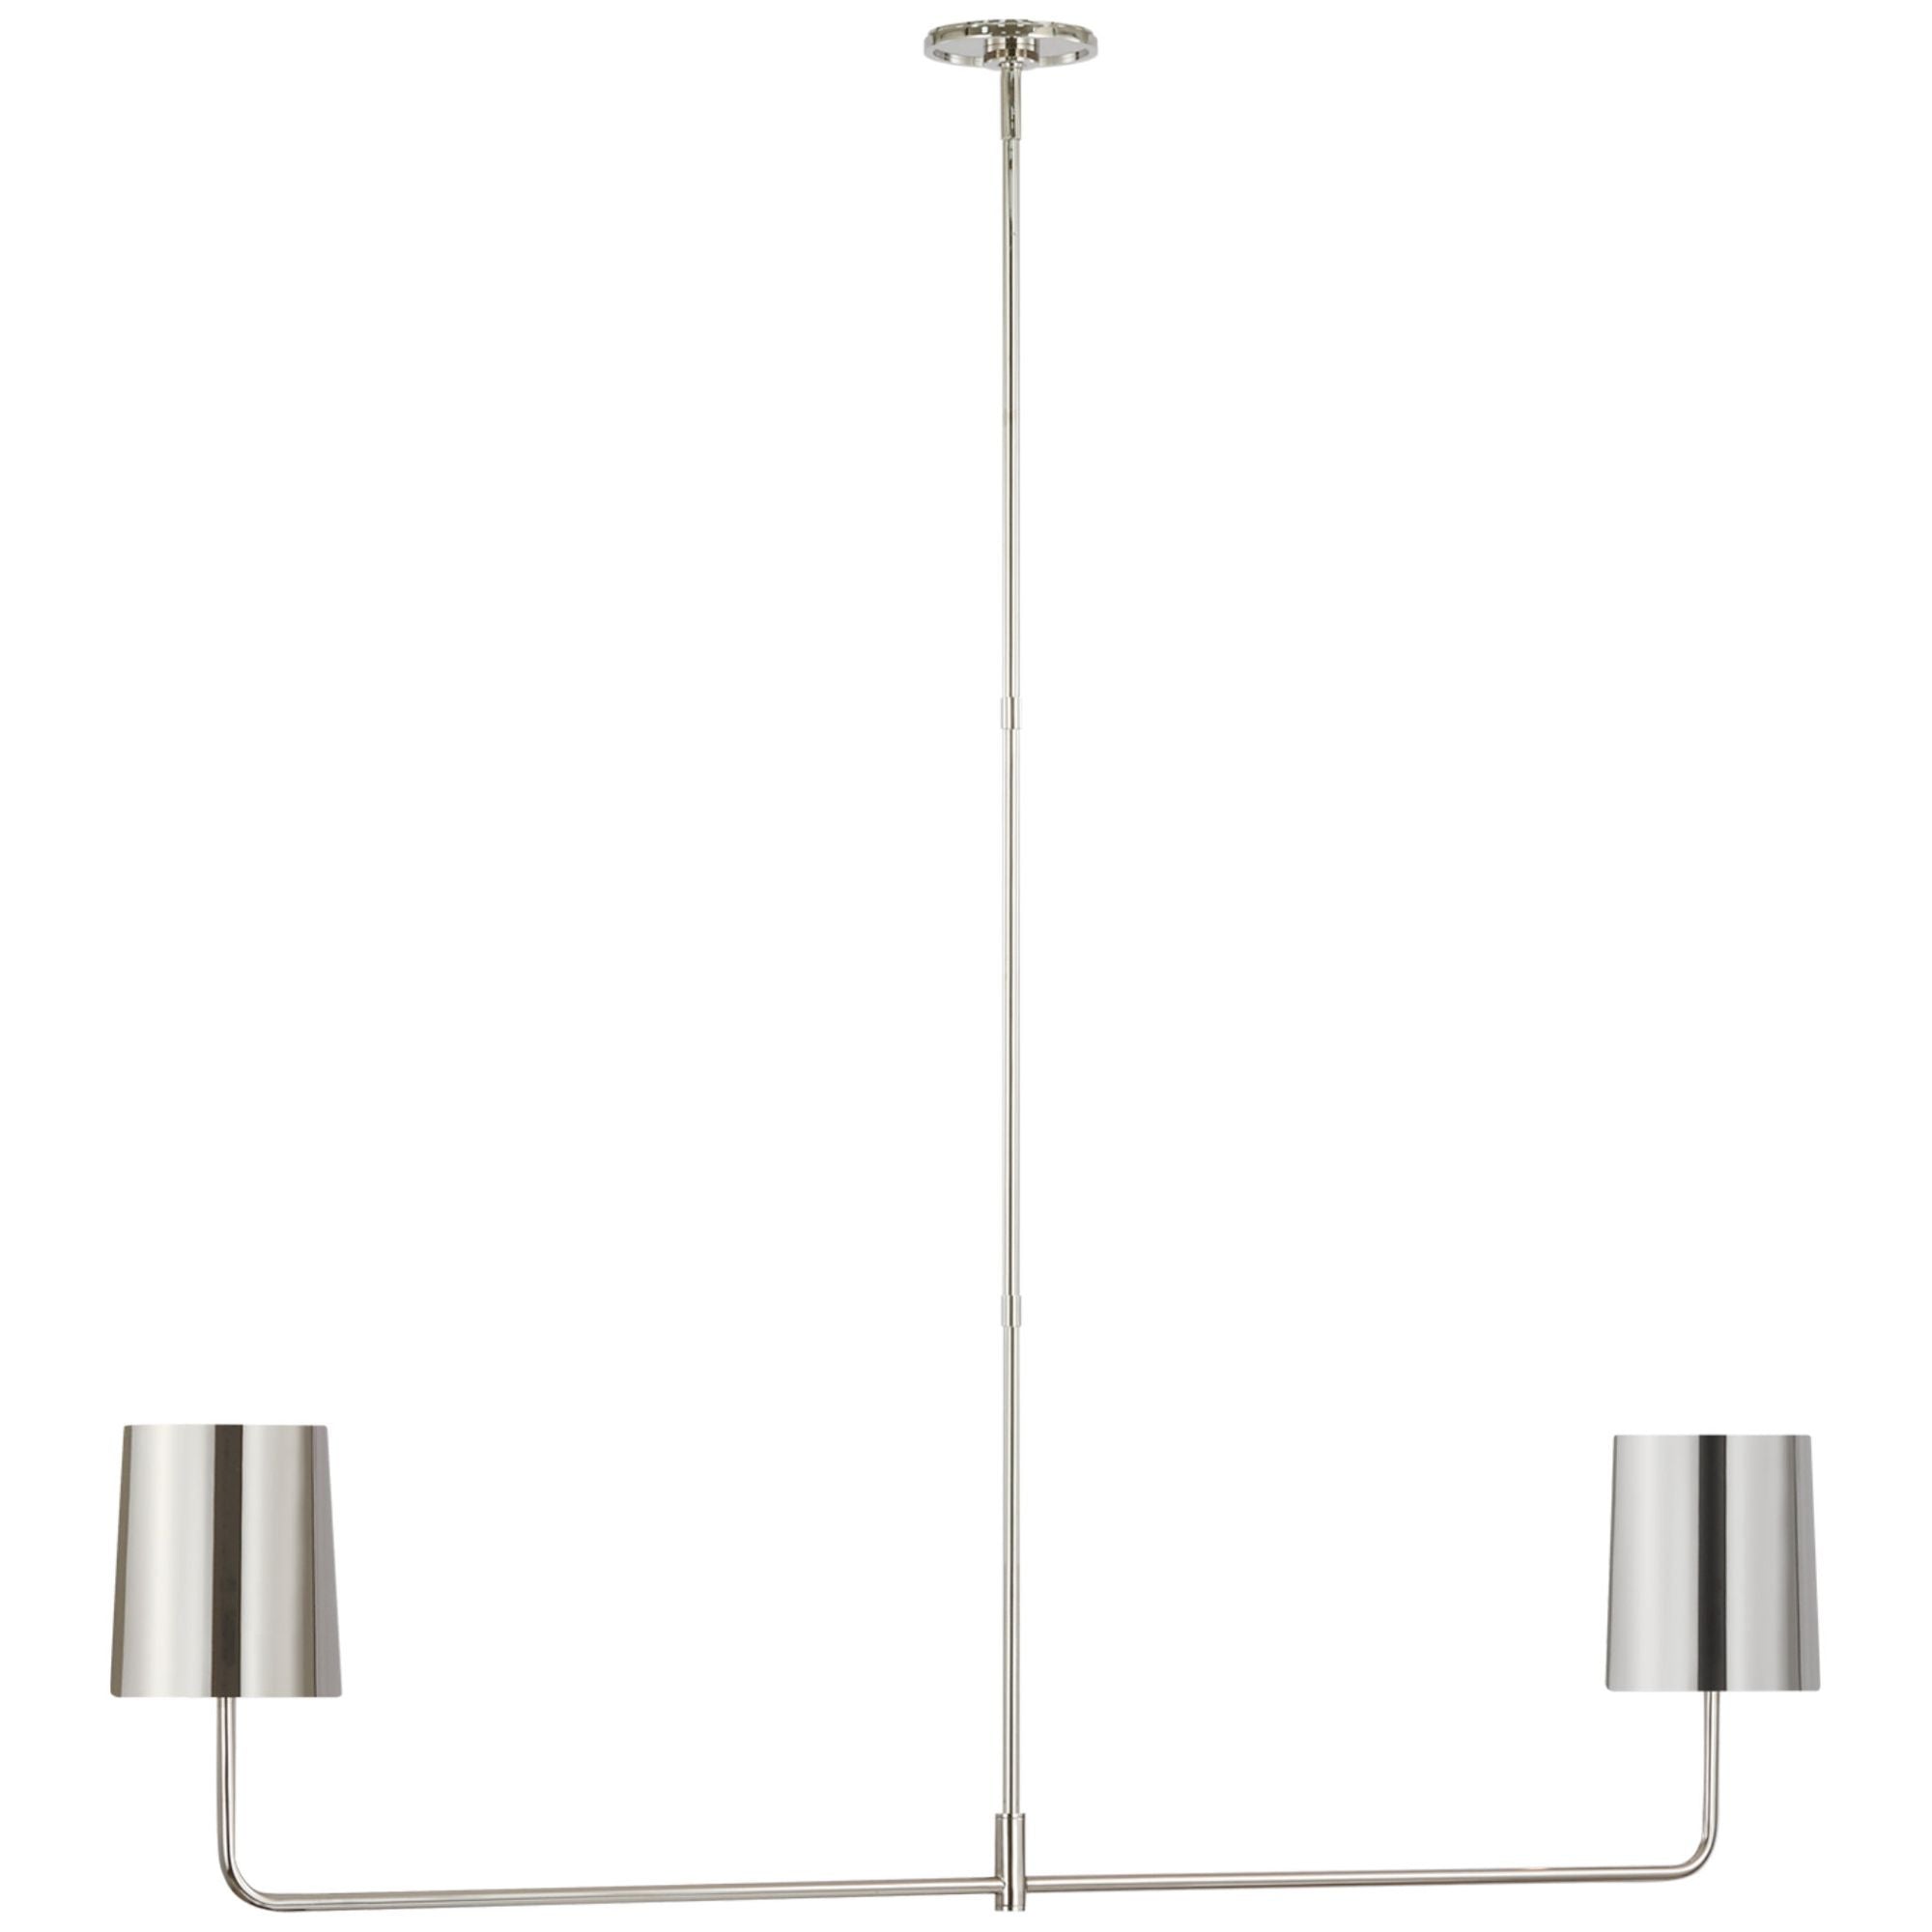 Barbara Barry Go Lightly 54" Two Light Linear Chandelier in Polished Nickel with Polished Nickel Shades